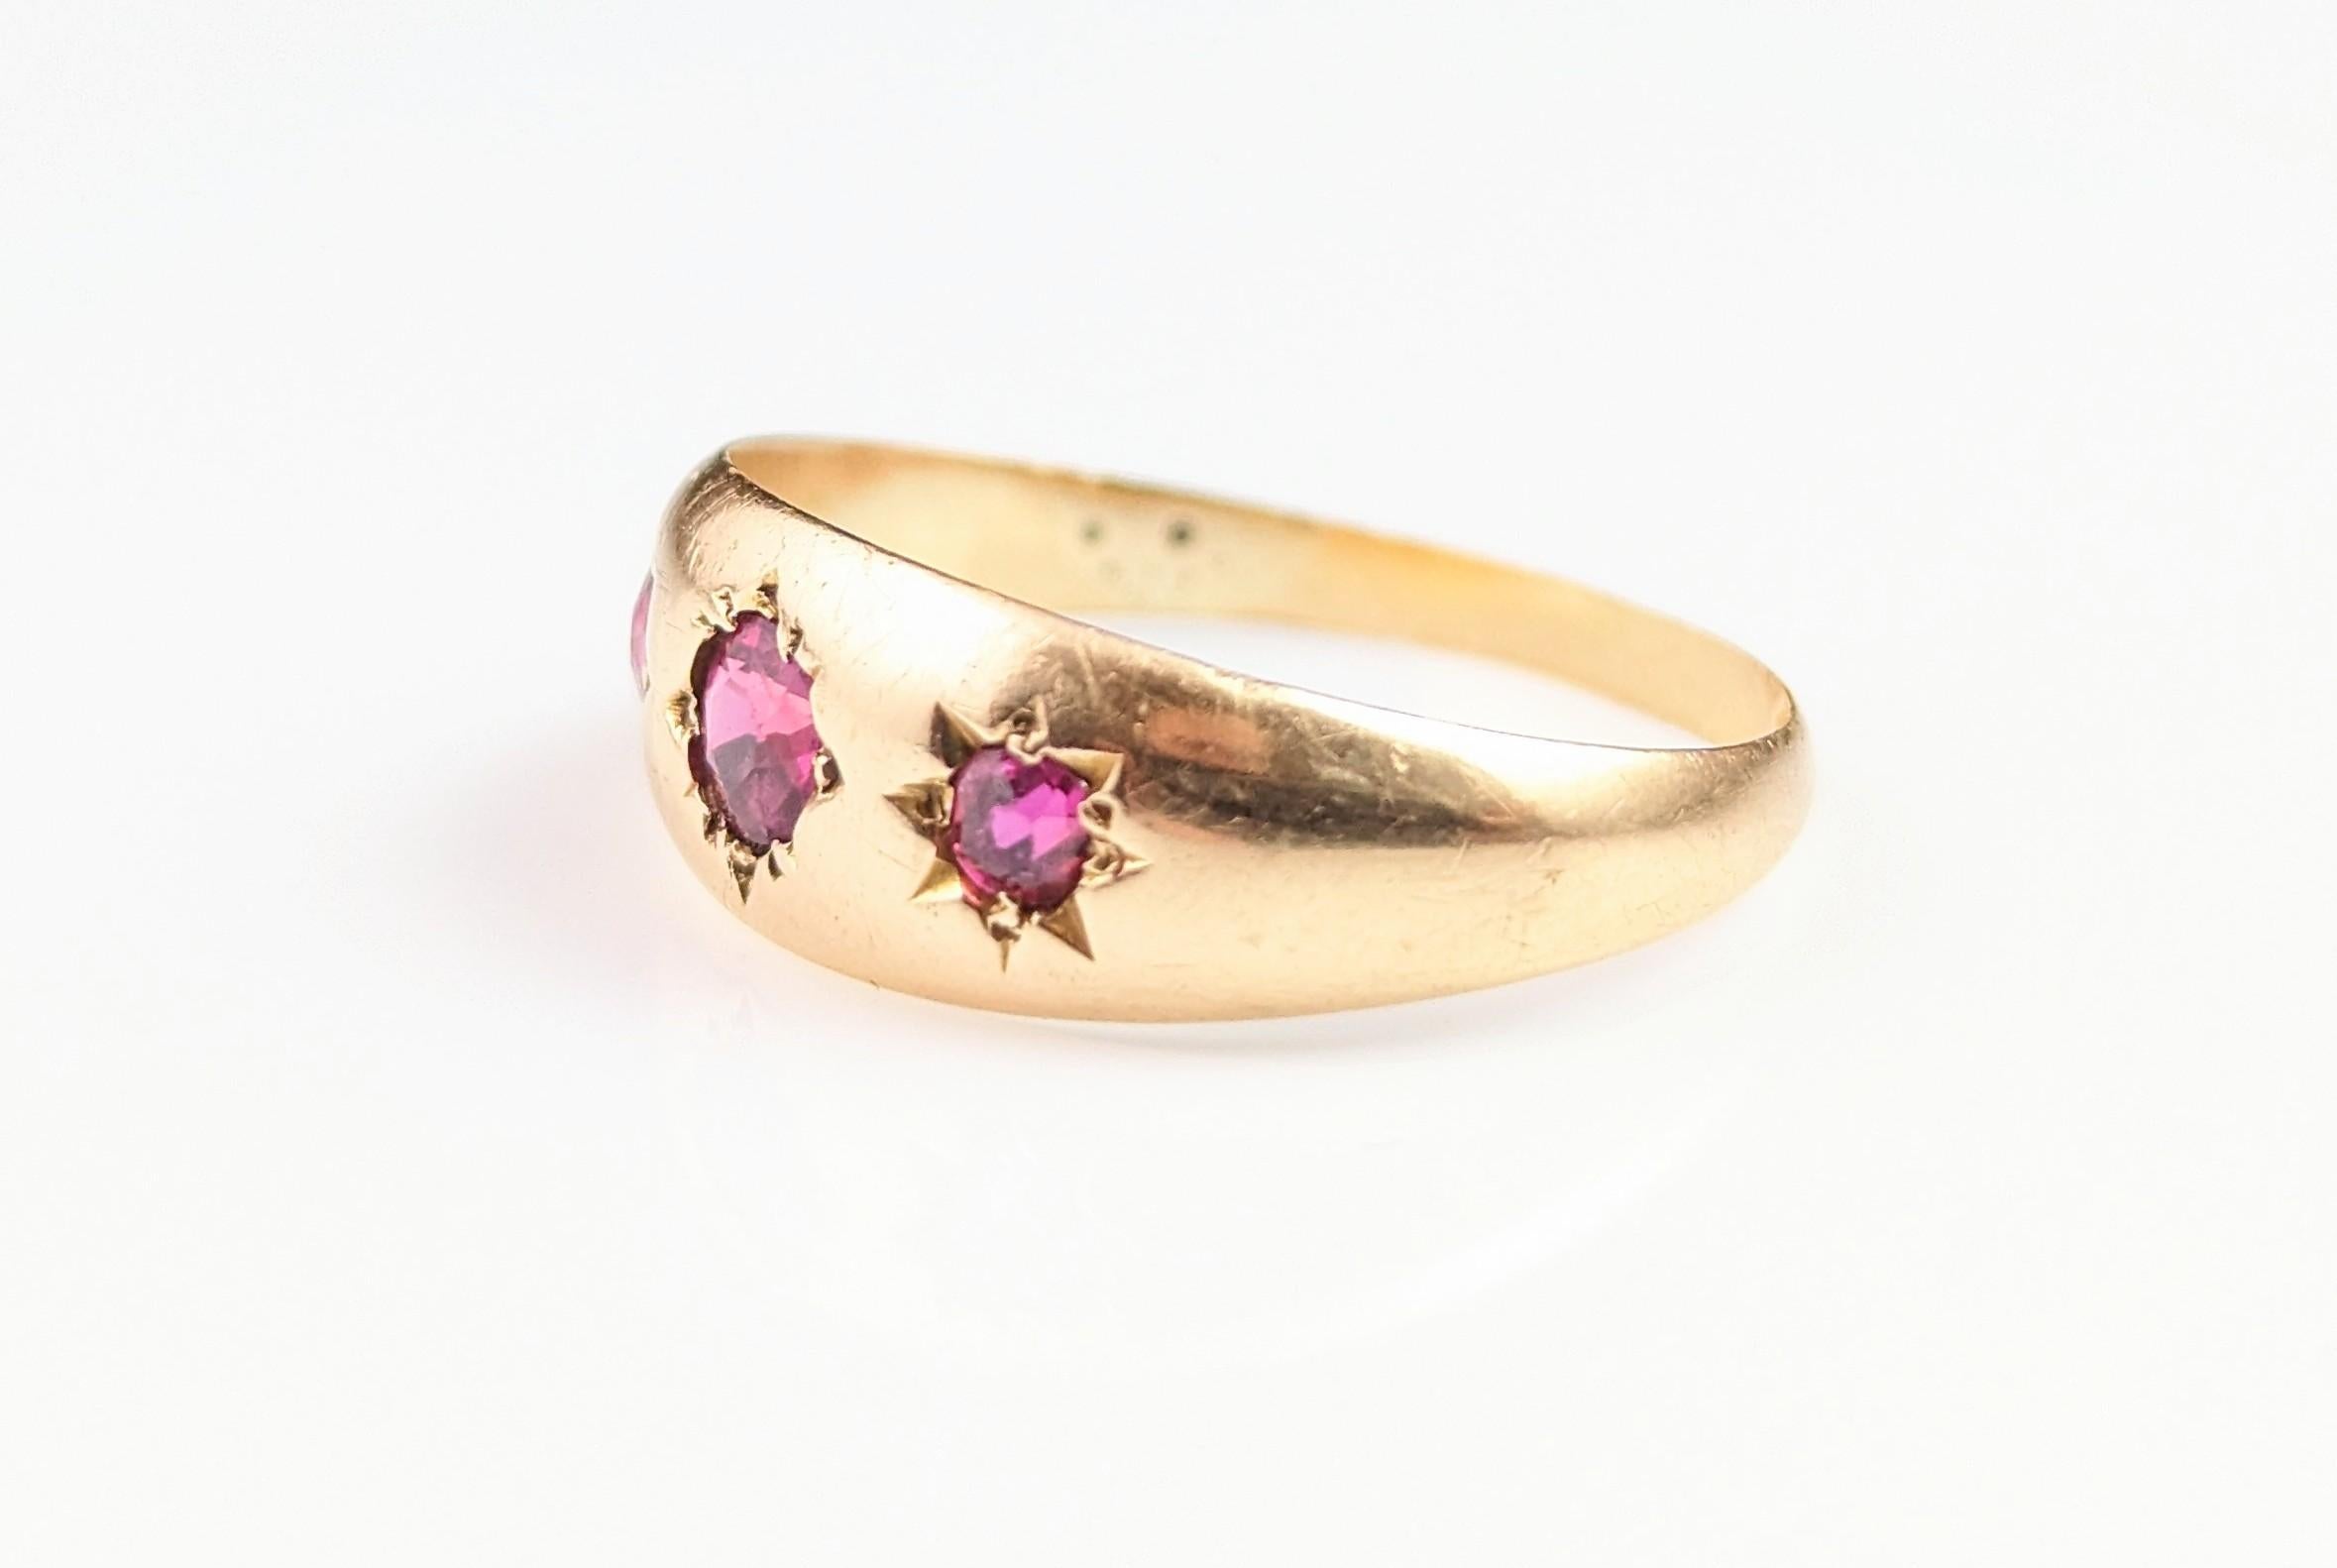 Antique Ruby Gypsy Set Ring, 18k Yellow Gold, Victorian 12